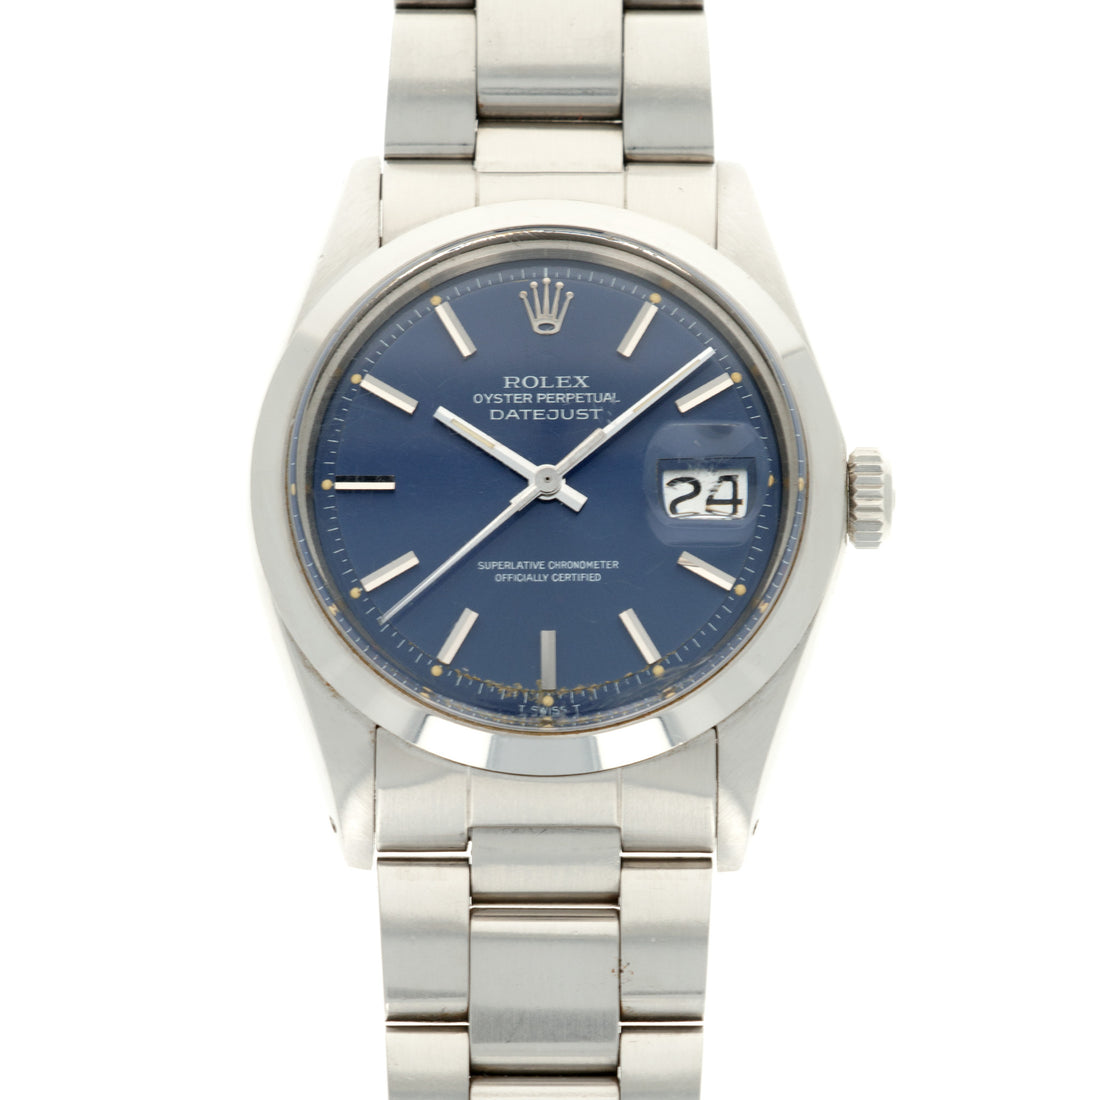 Rolex Steel Datejust Ref. 1600 with Blue Dial